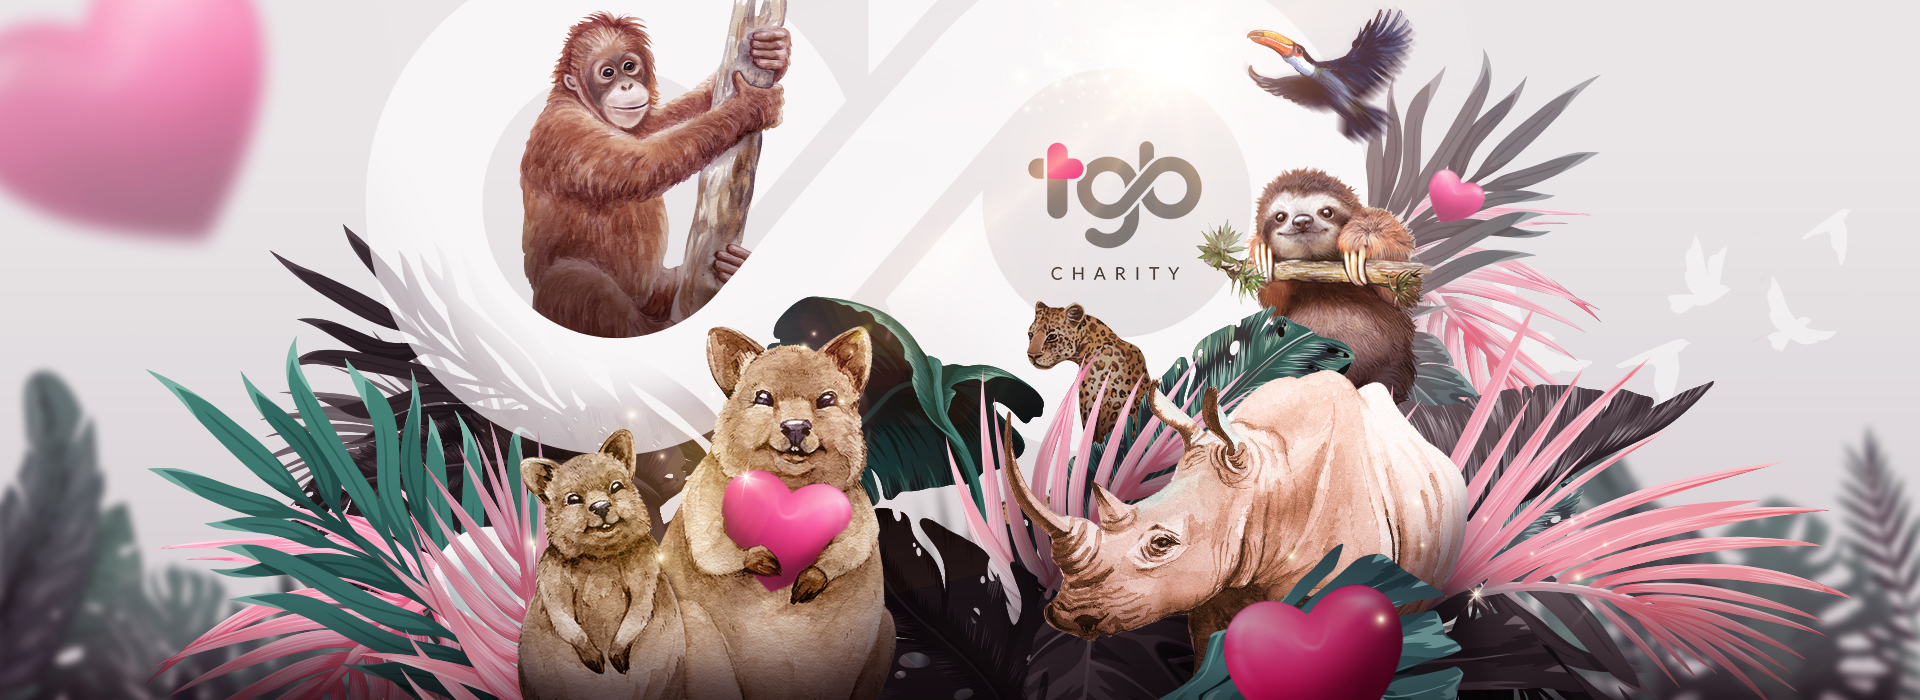 TGB Charity - All creatures on Earth are connected